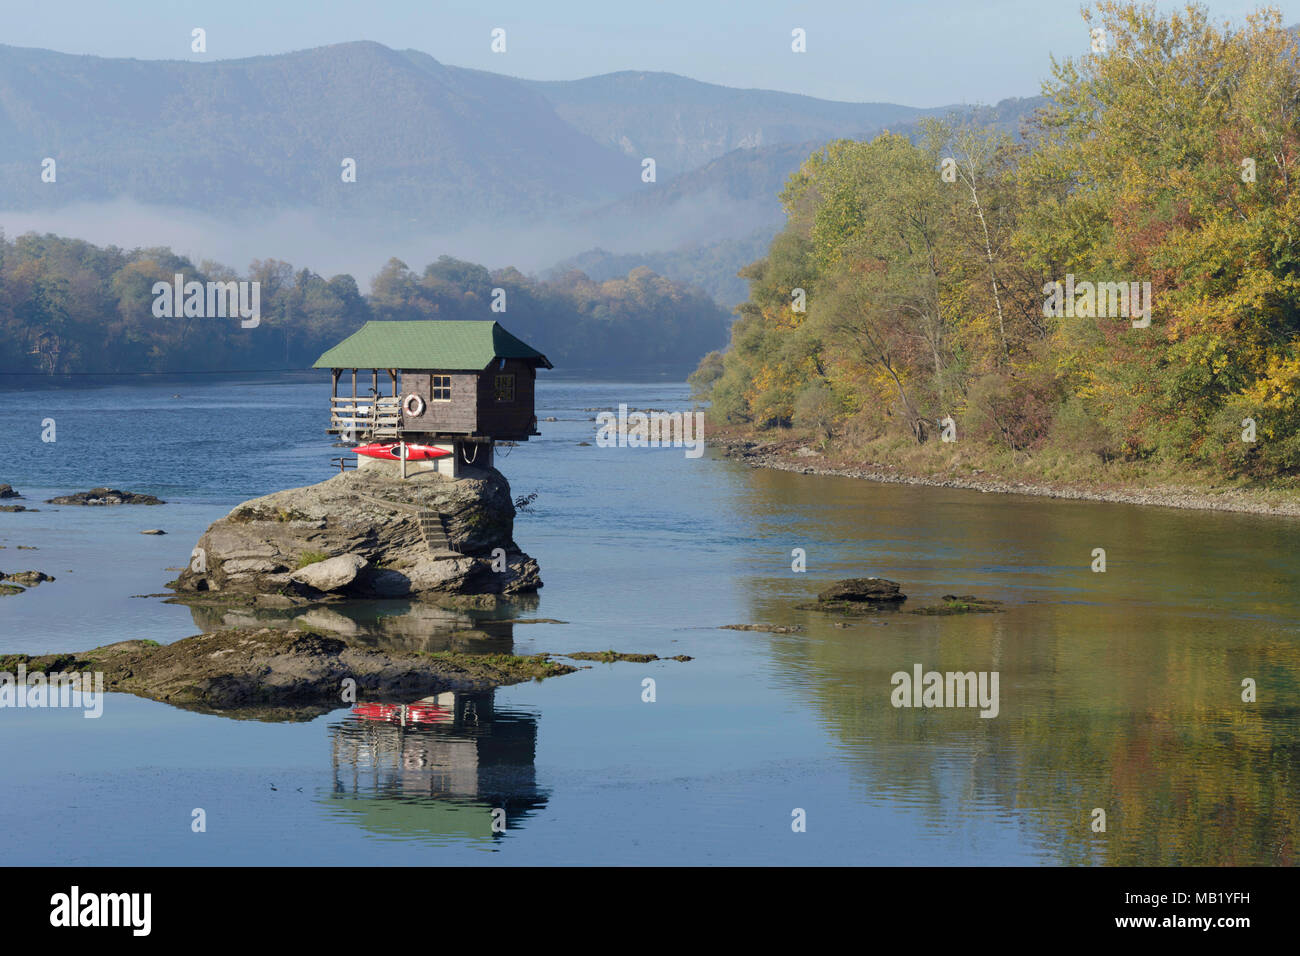 The house on the River Drina, with trees in Autumn colour and distant mountains, Bajina Basta, Serbia, October Stock Photo